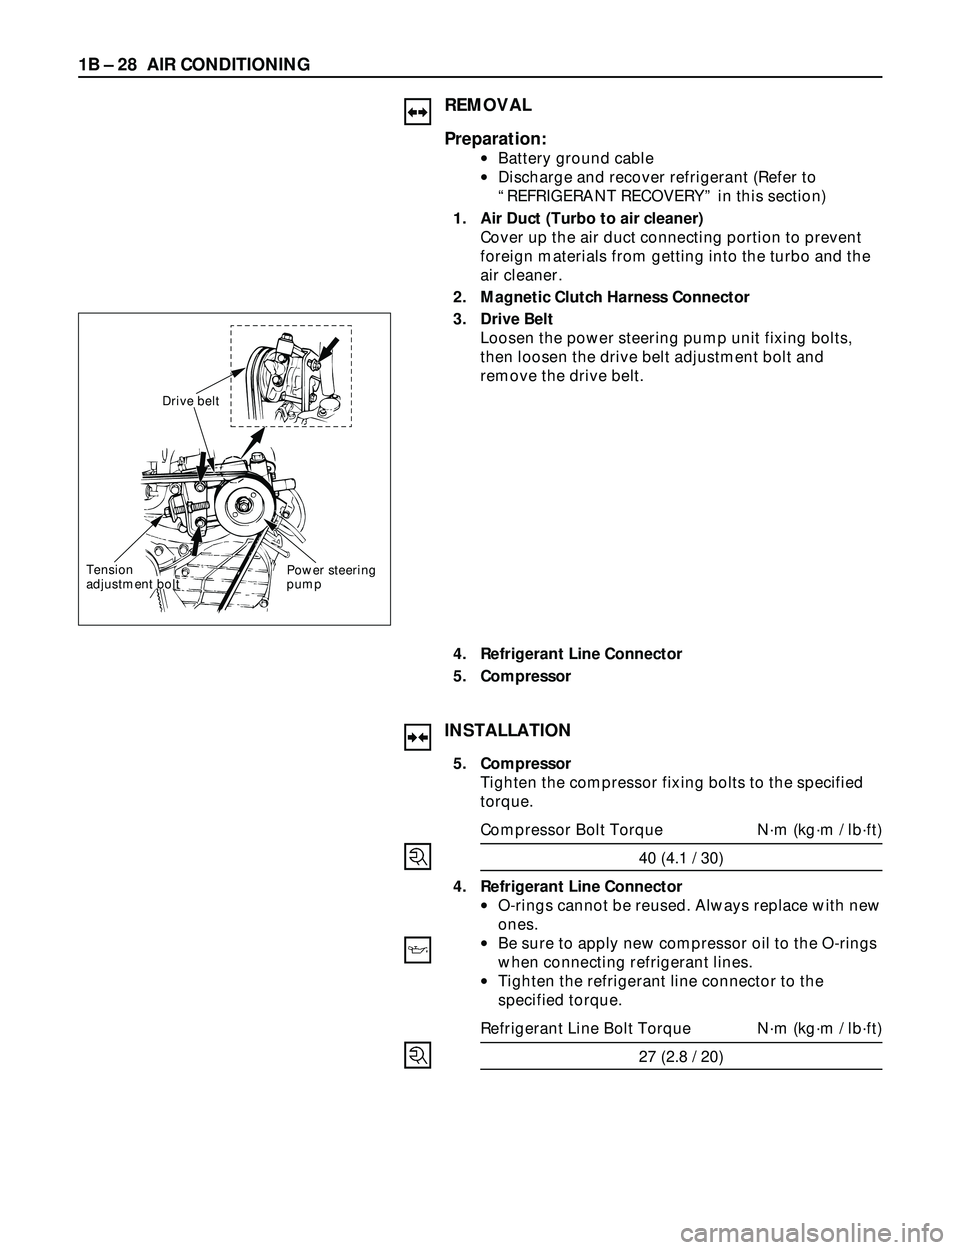 ISUZU TROOPER 1998  Service Repair Manual 1B Ð 28 AIR CONDITIONING
REMOVAL
Preparation:
·Battery ground cable
·Discharge and recover refrigerant (Refer to
ÒREFRIGERANT RECOVERYÓ in this section) 
1. Air Duct (Turbo to air cleaner)
Cover 